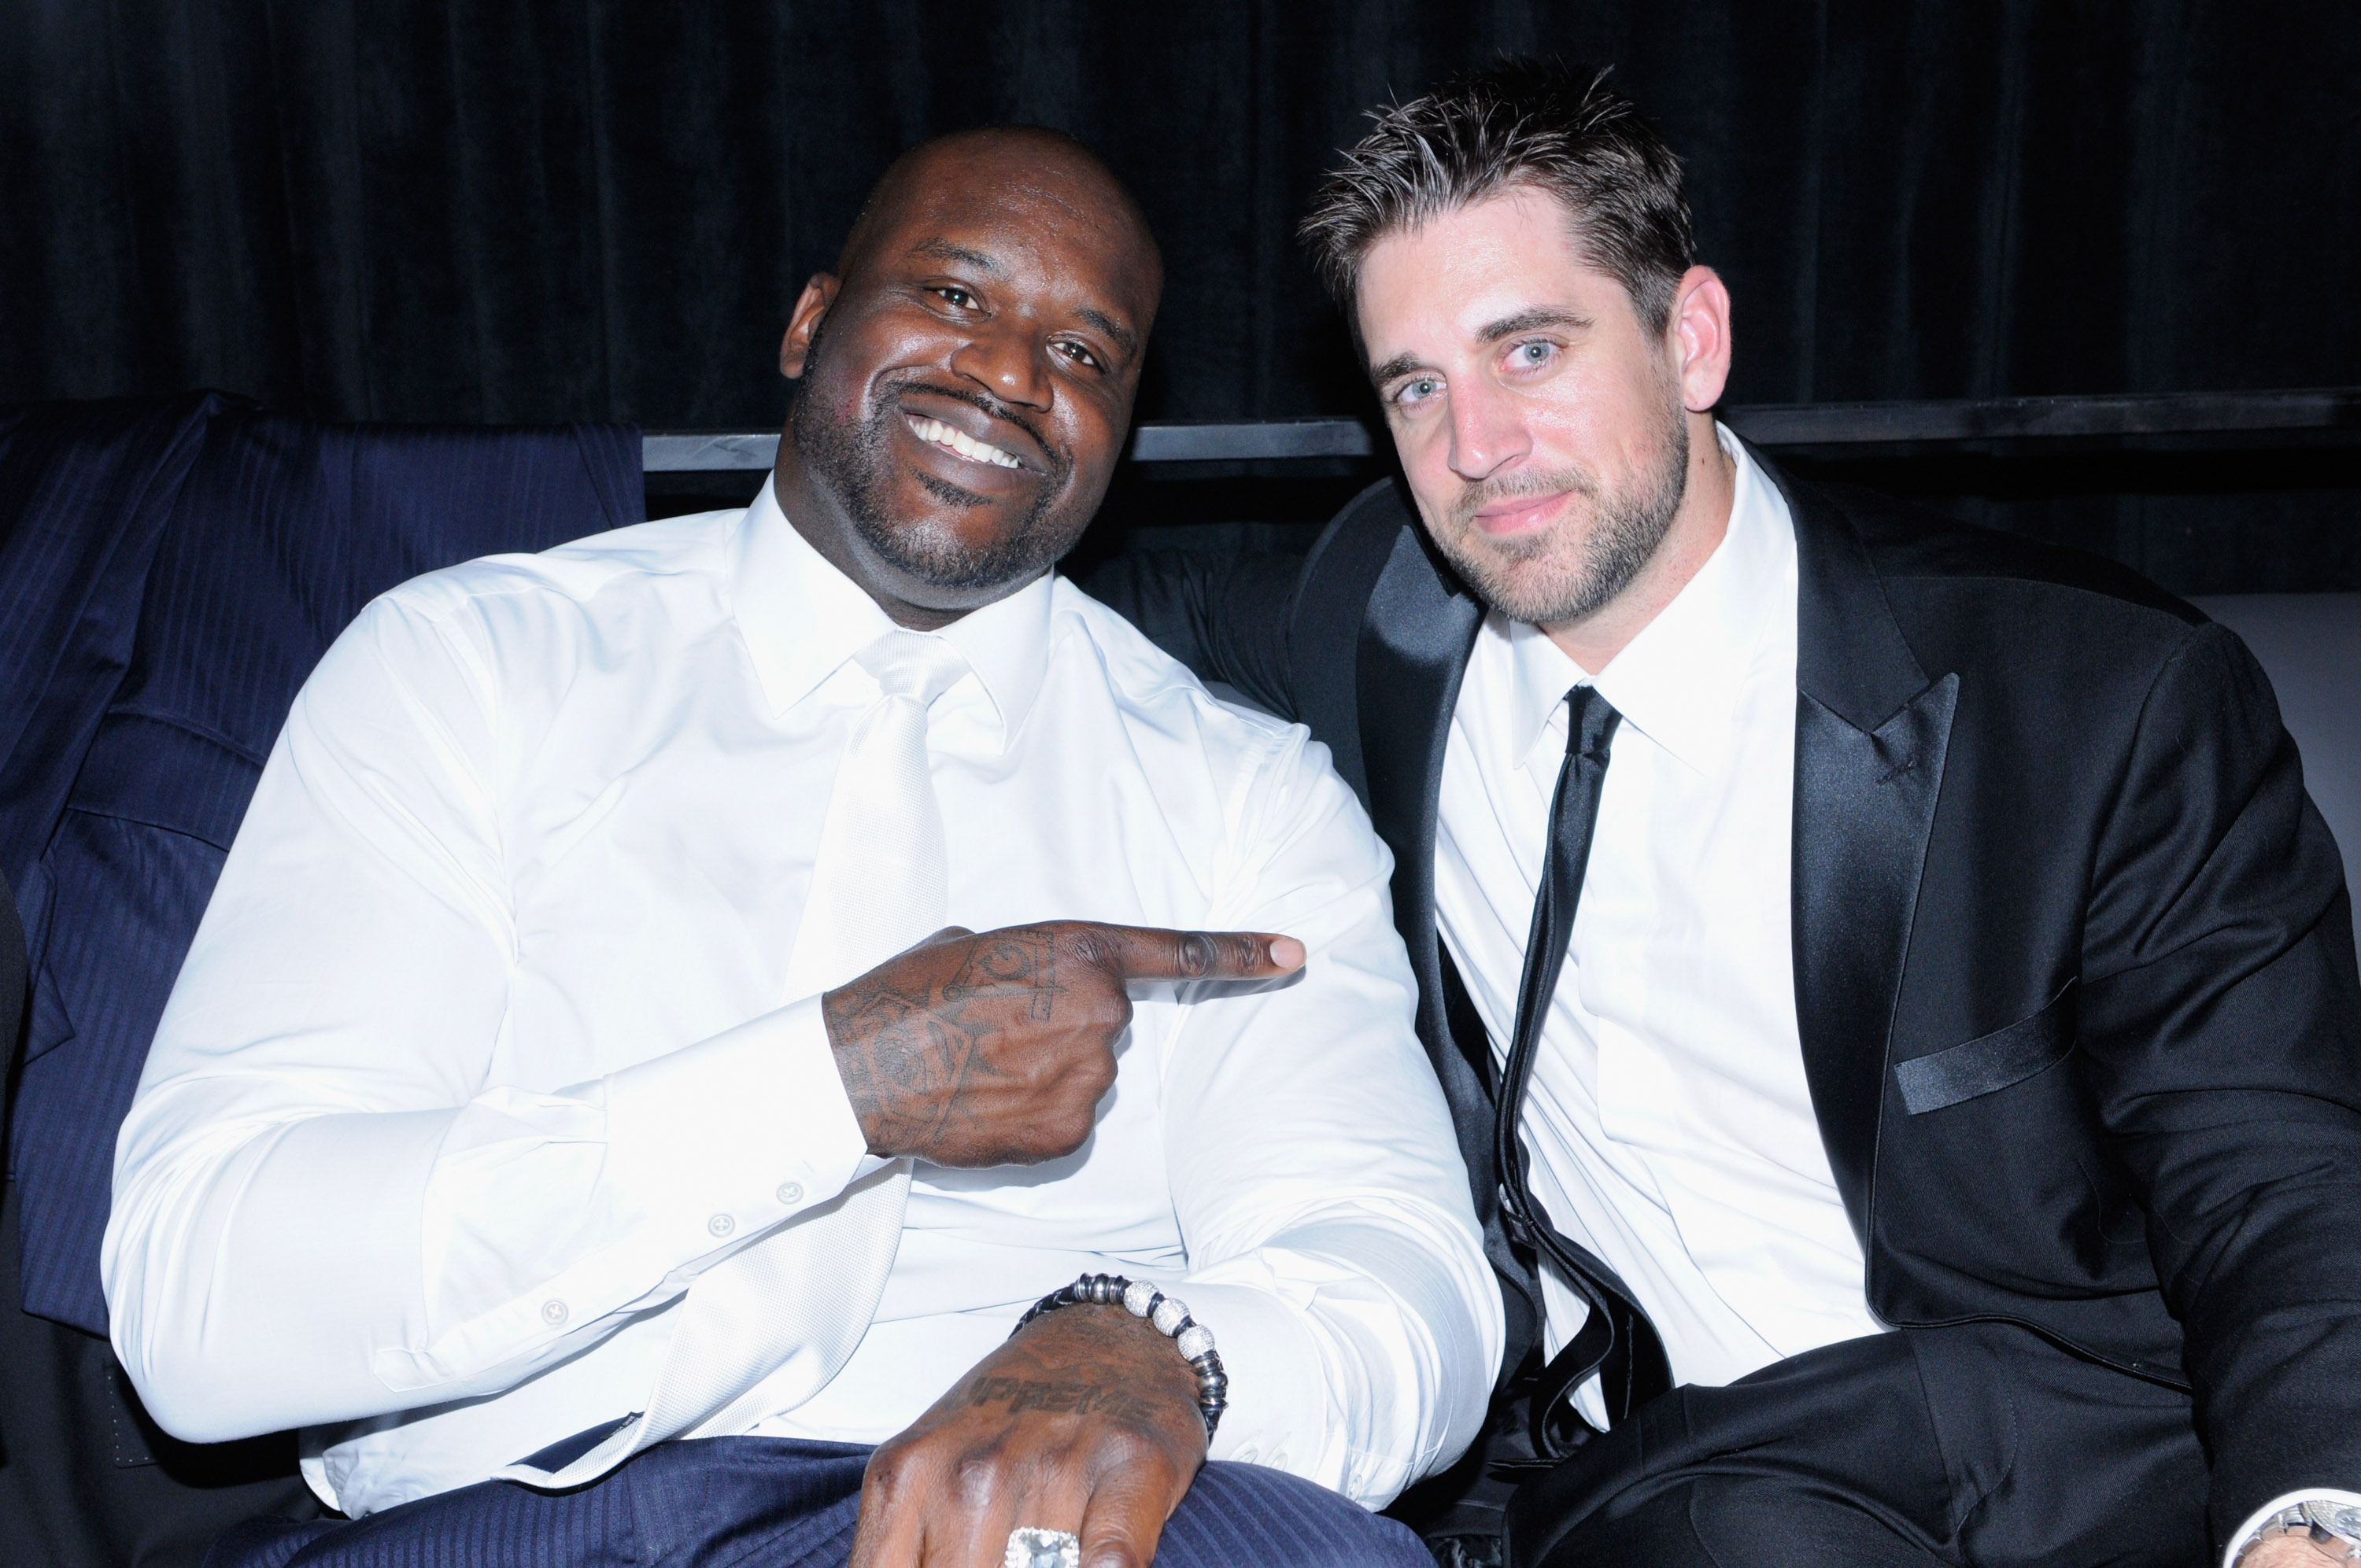 LOUISVILLE, KY - MAY 03:  Shaquille O'Neal and Aaron Rodgers attend the Maxim And Maker's 46 Fillies & Stallions Hosted By Blackrock at Mellwood Arts & Entertainment Center on May 3, 2013 in Louisville, Kentucky.  (Photo by Stephen Cohen/Getty Images for Maxim)